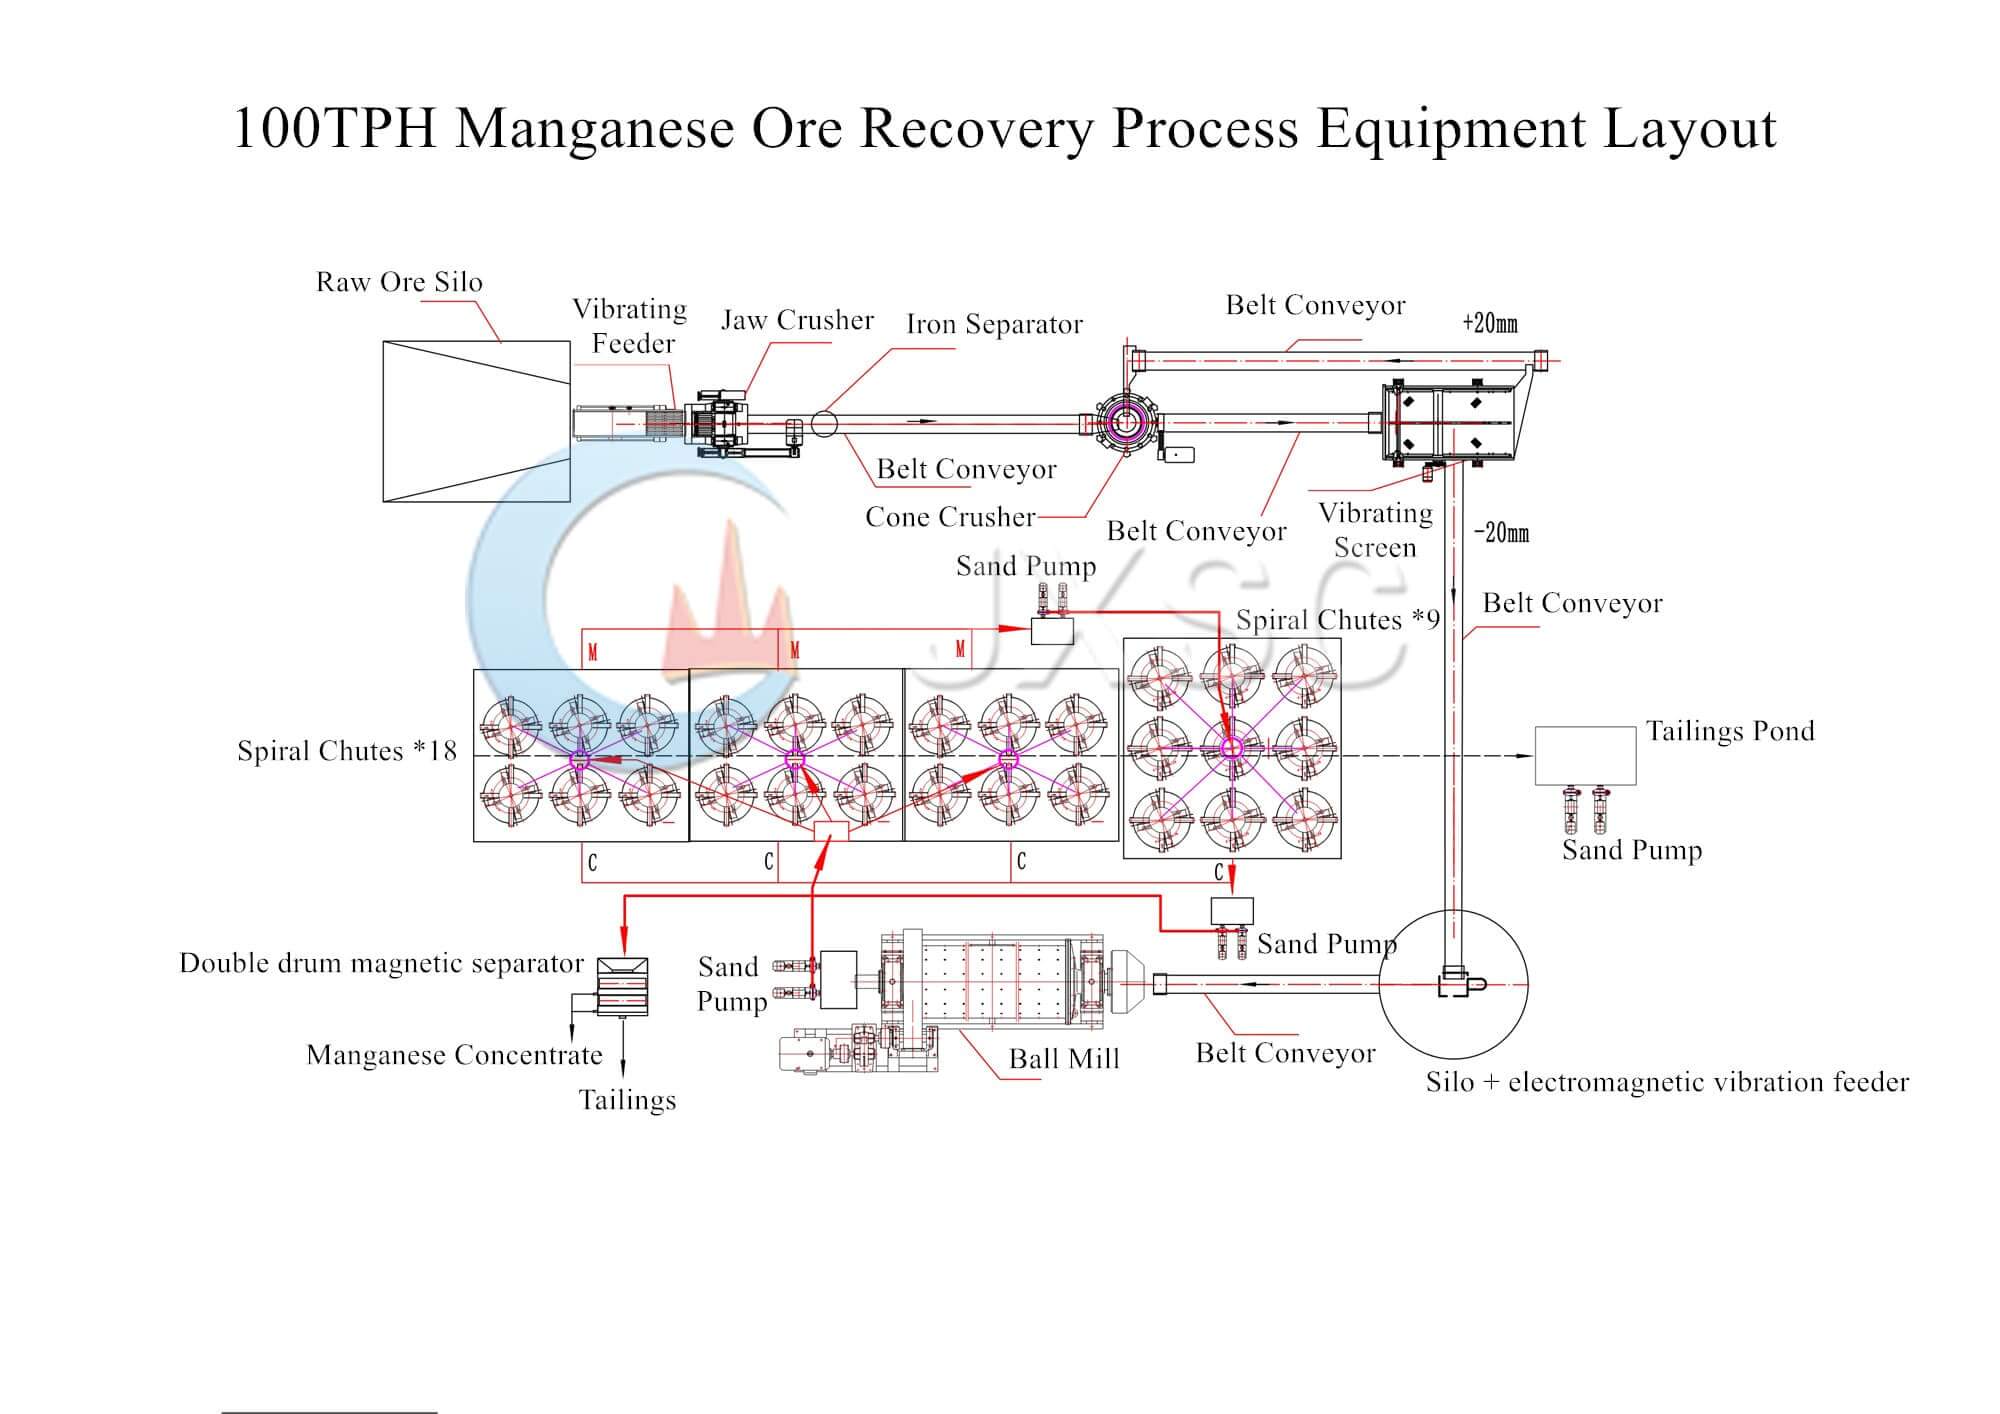 Manganese Ore Recovery Processing